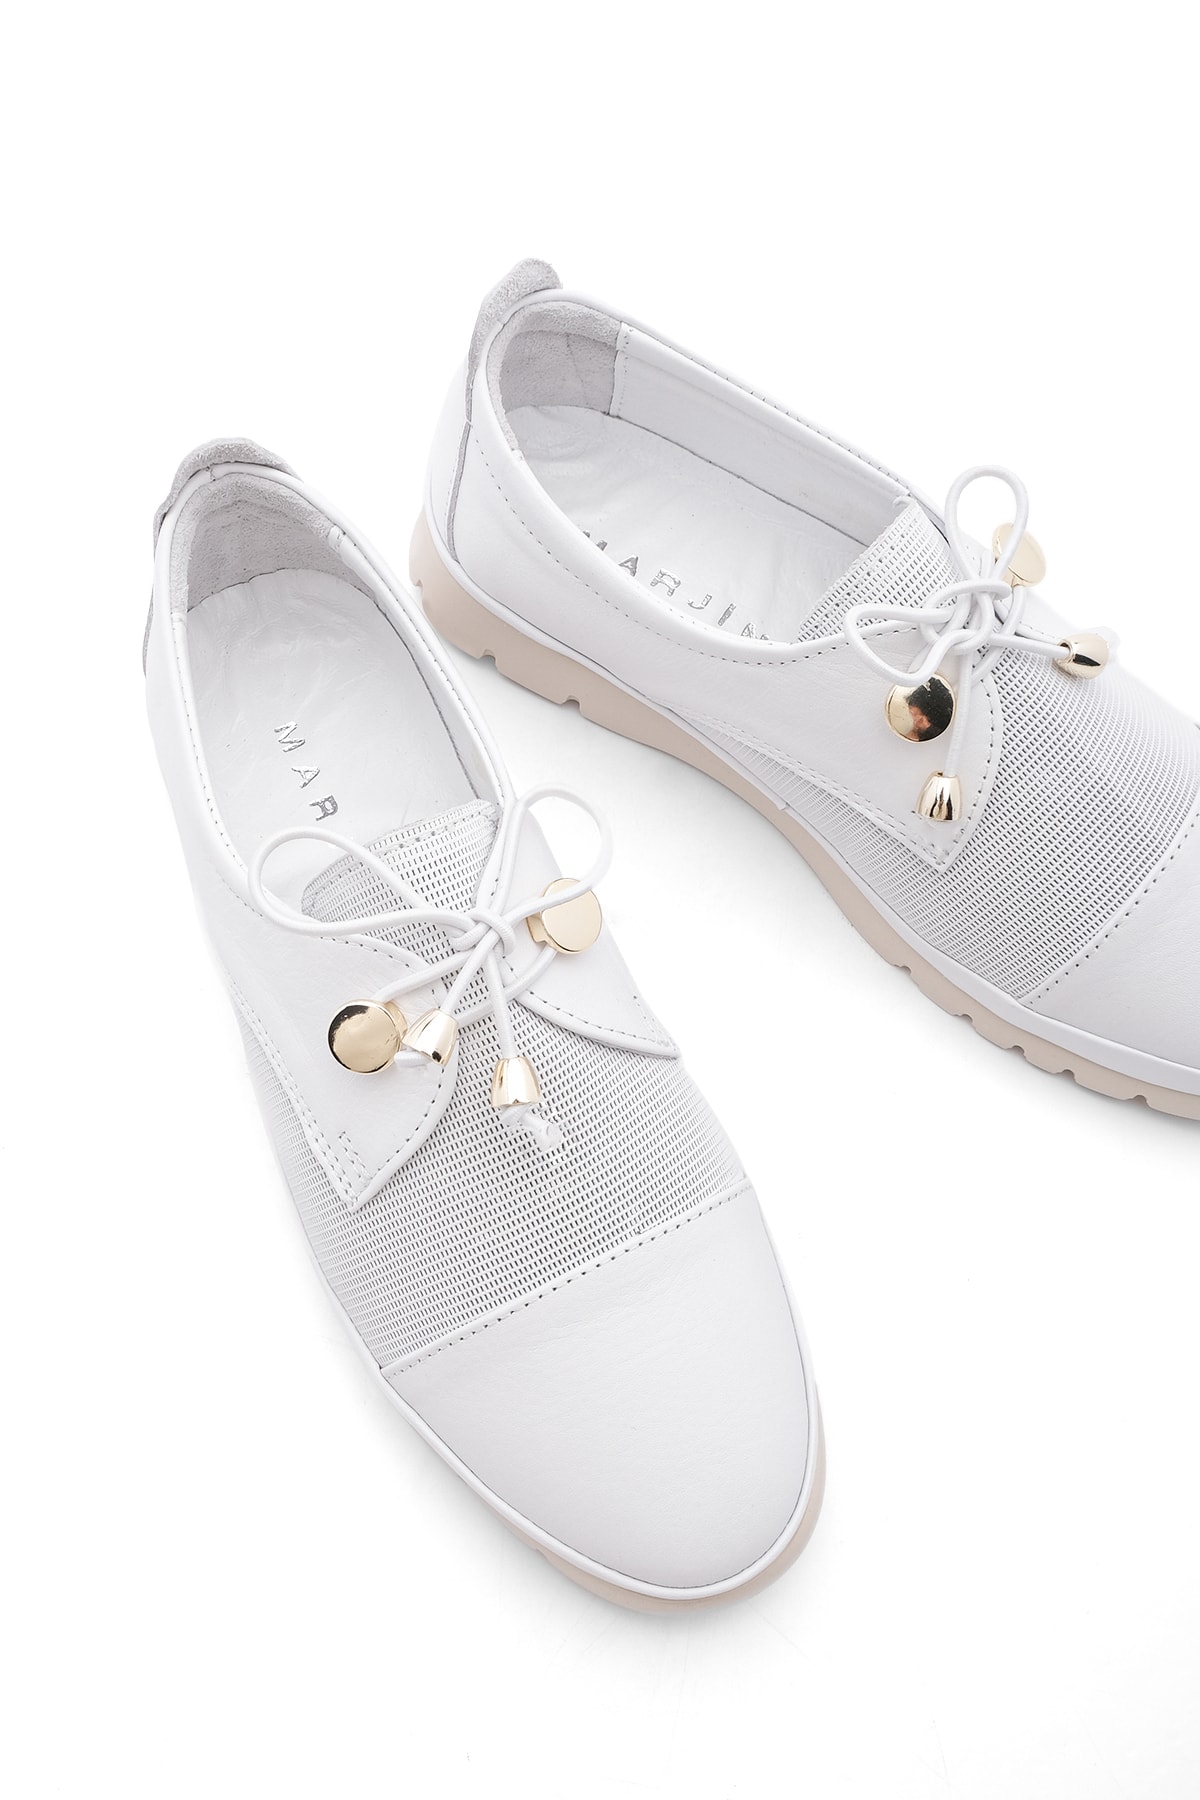 Marjin Women's Genuine Leather Comfort Casual Shoes with Lace-Up Demas white